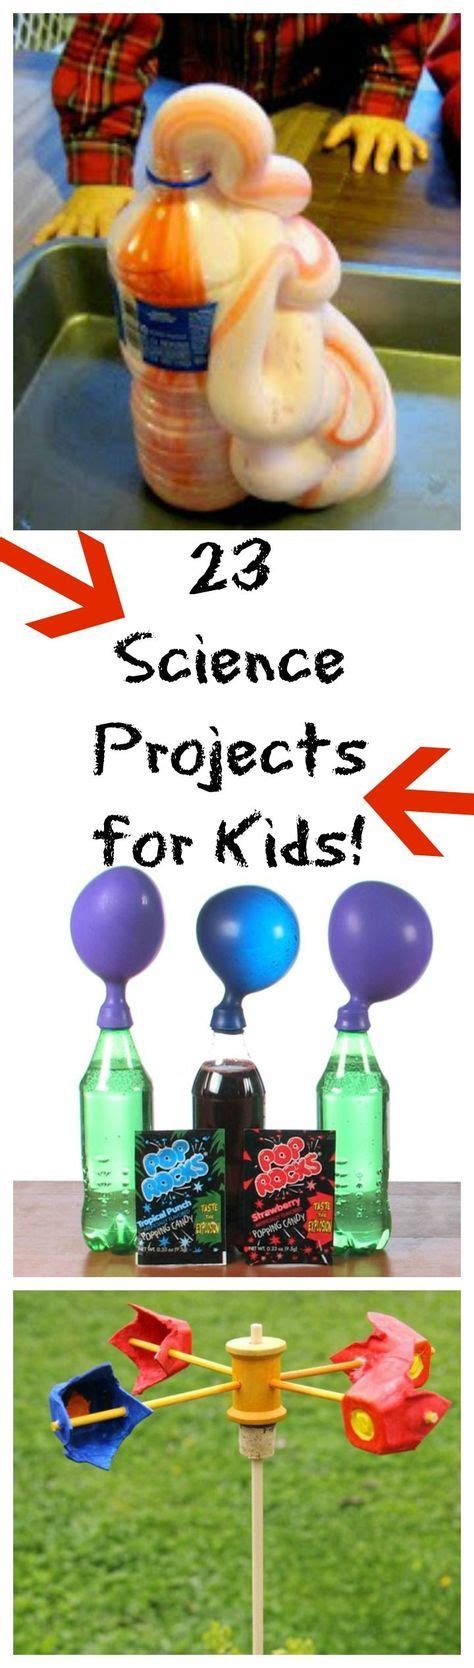 23 Science Projects For Kids Science For Kids Science Projects For